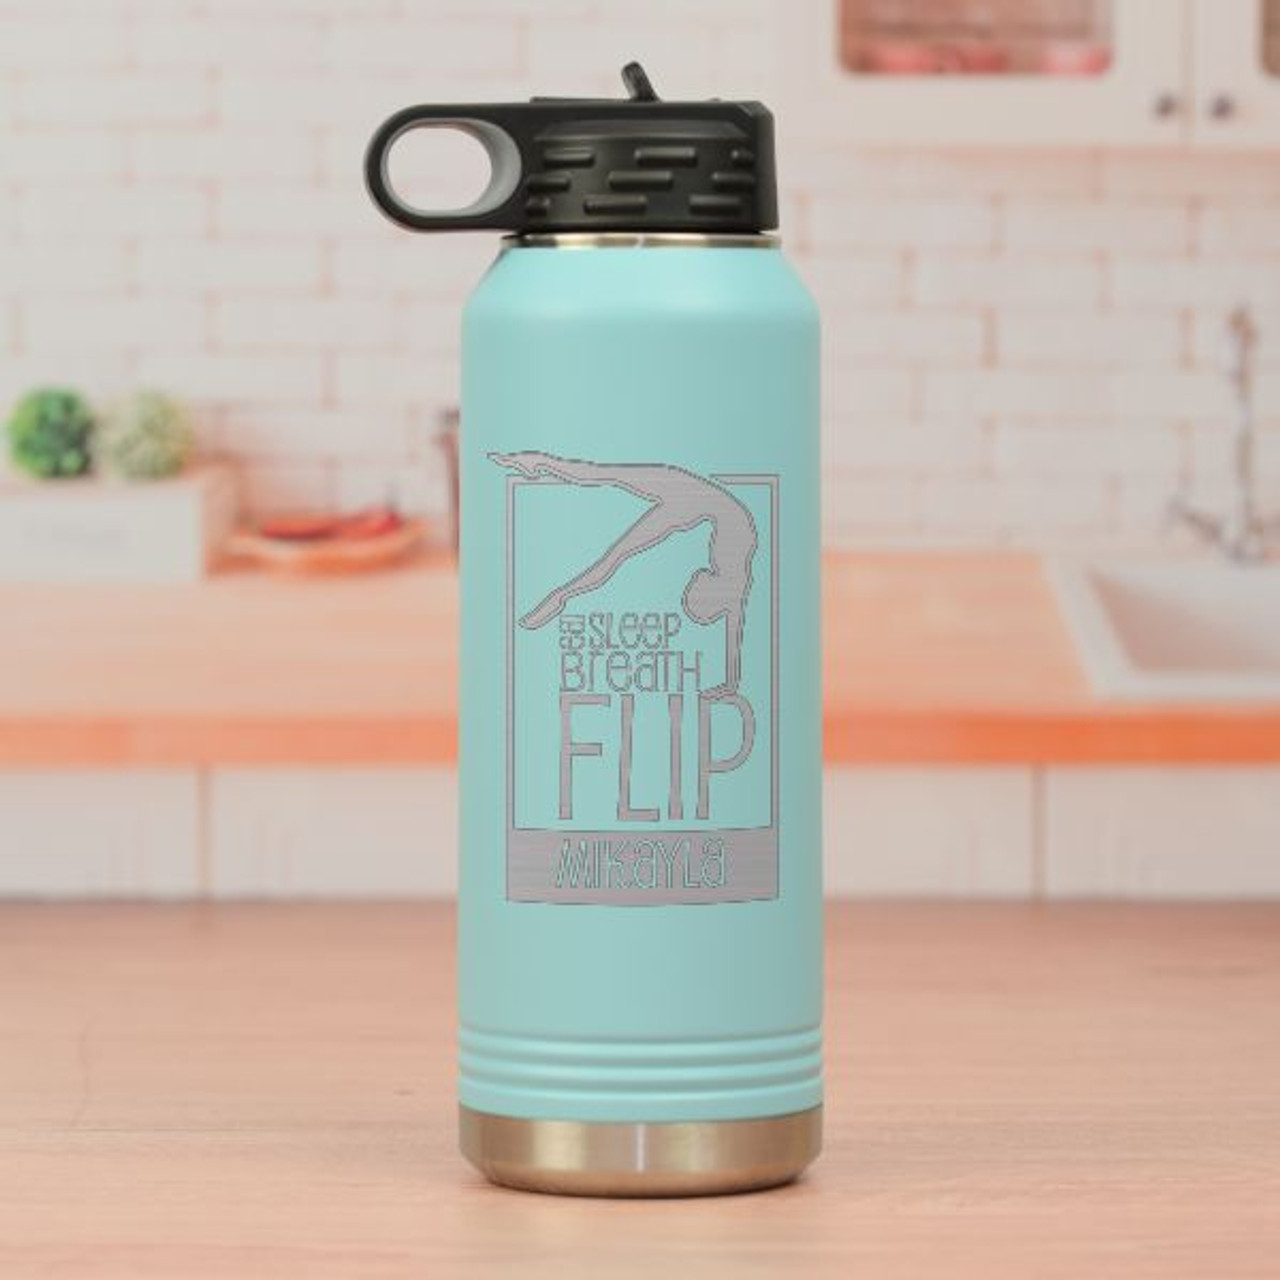 https://cdn11.bigcommerce.com/s-mdwz5t7wme/images/stencil/1280x1280/products/2080/6822/DW5076-Gymnast-waterbottle-t__91639.1701711861.jpg?c=2?imbypass=on